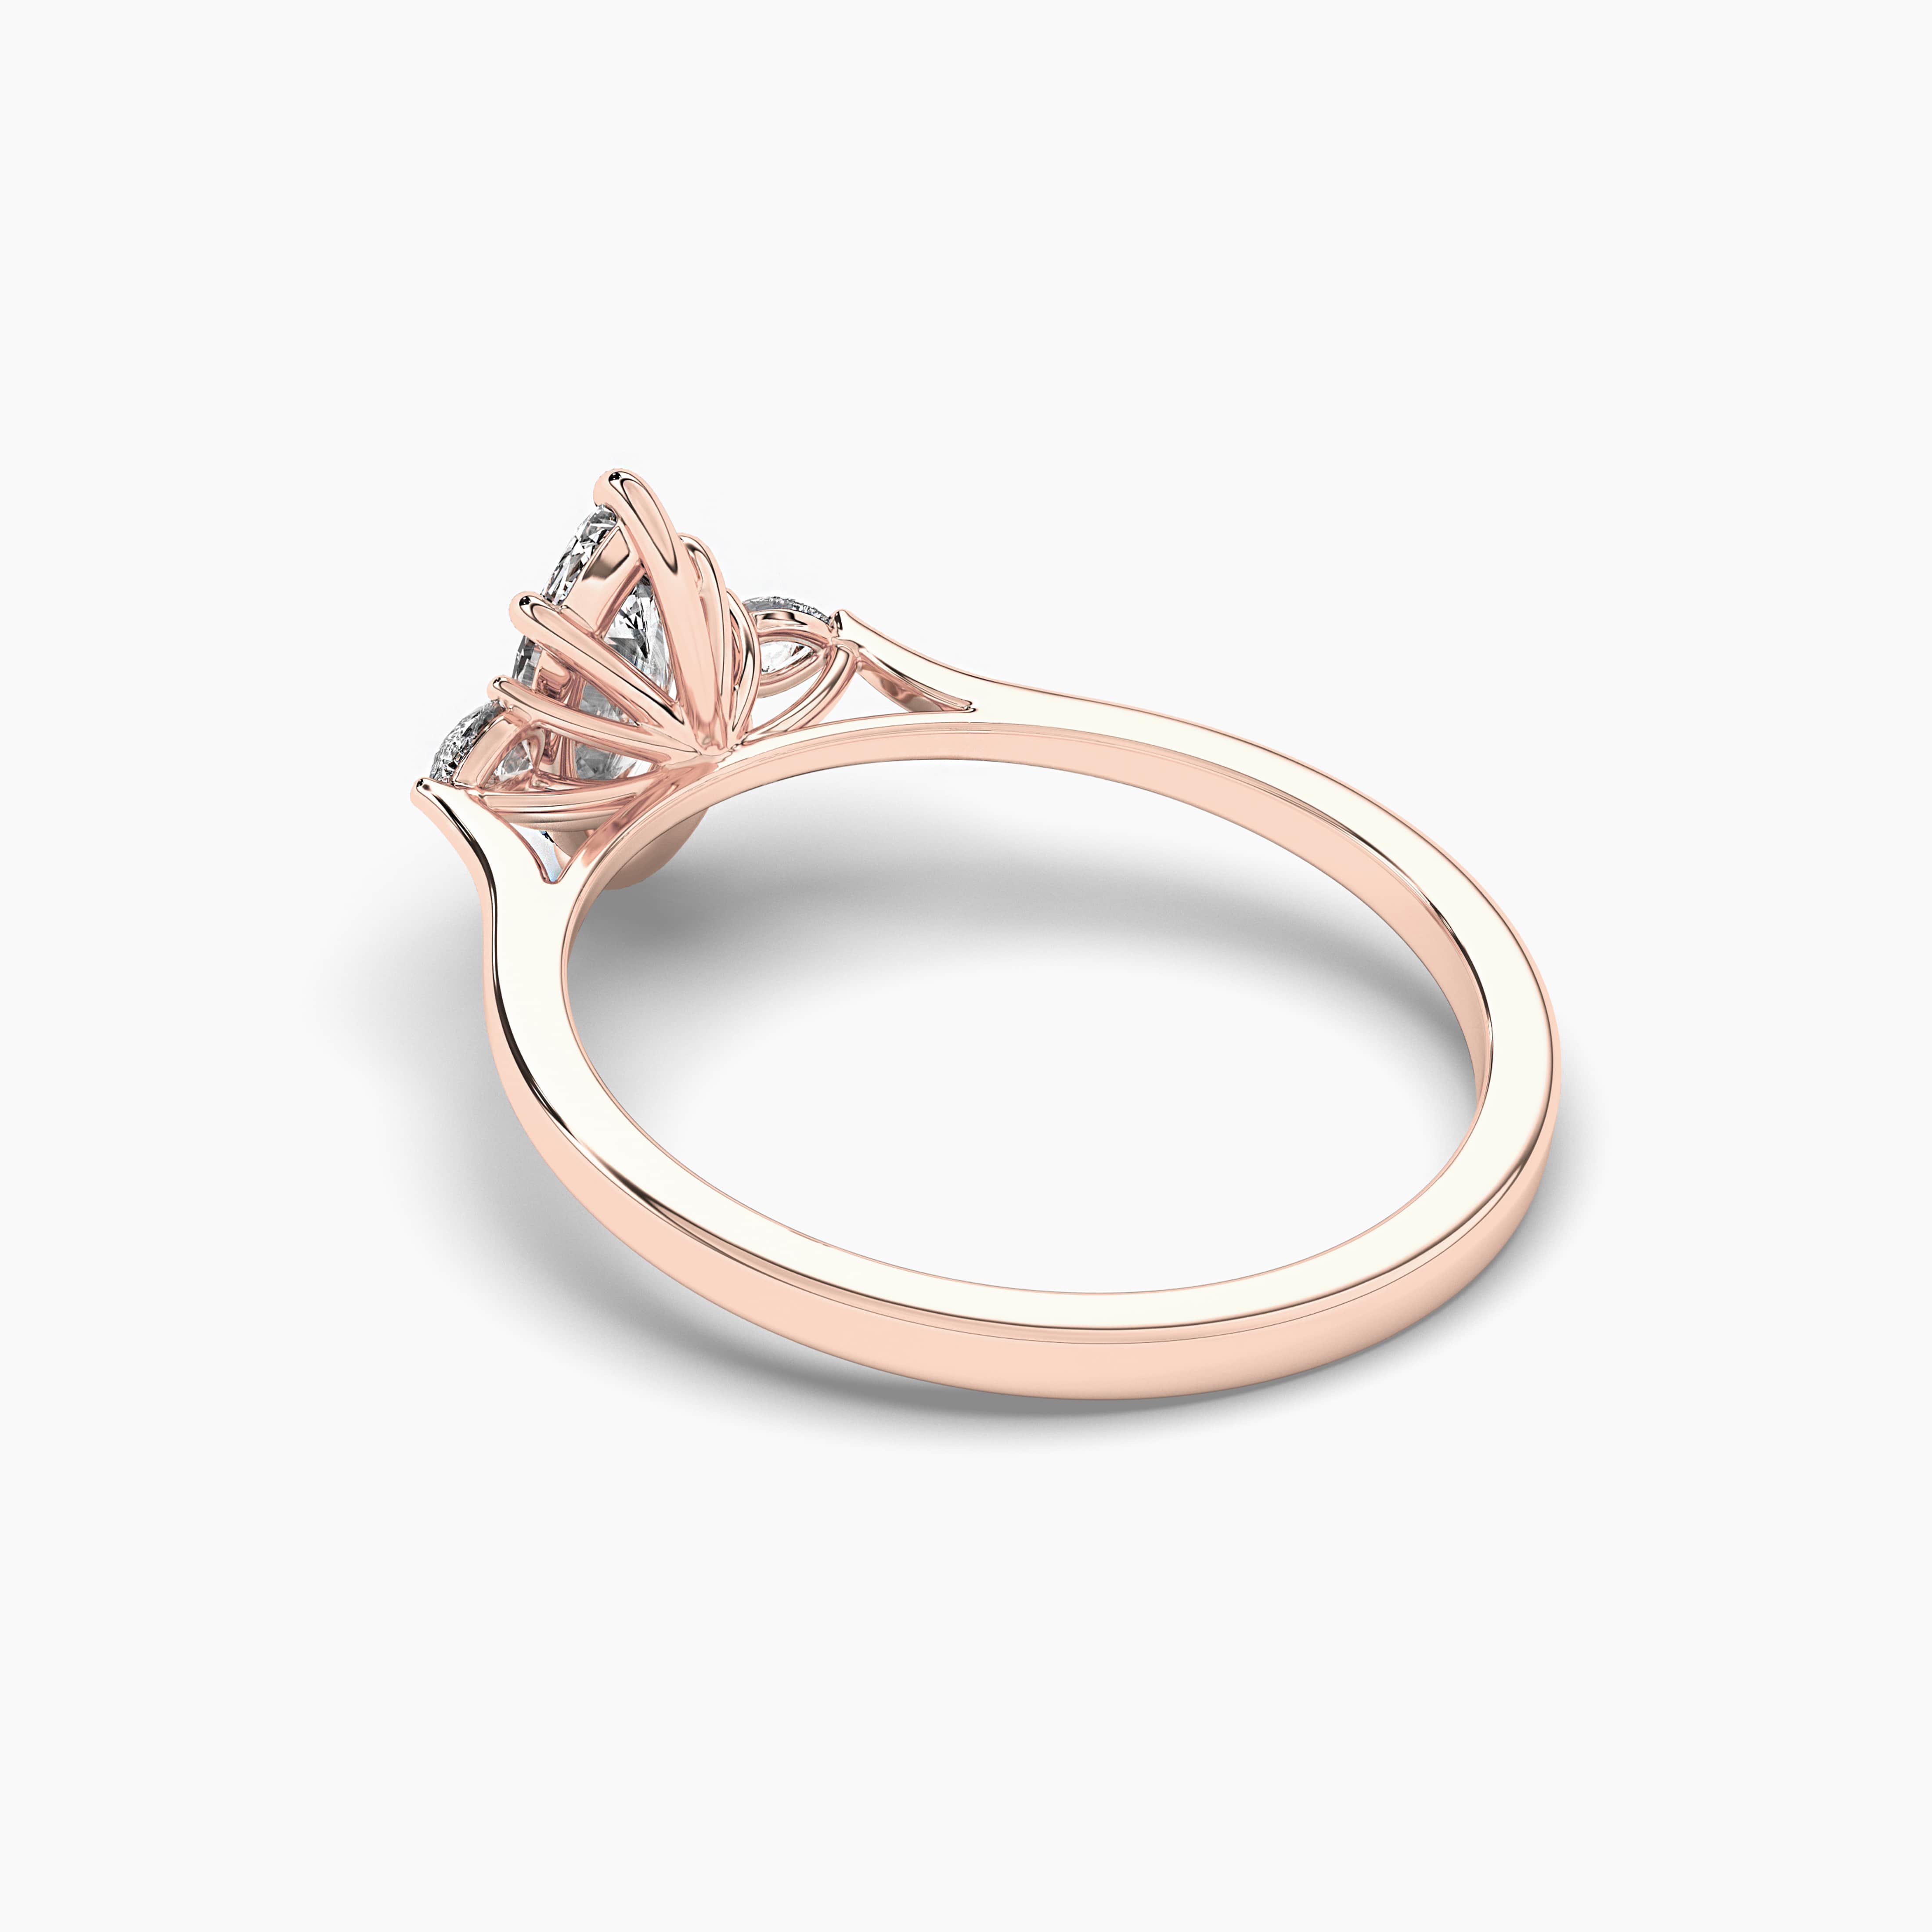 ROSE GOLD MARQUISE CUT DIAMOND ENGAGEMENT RING